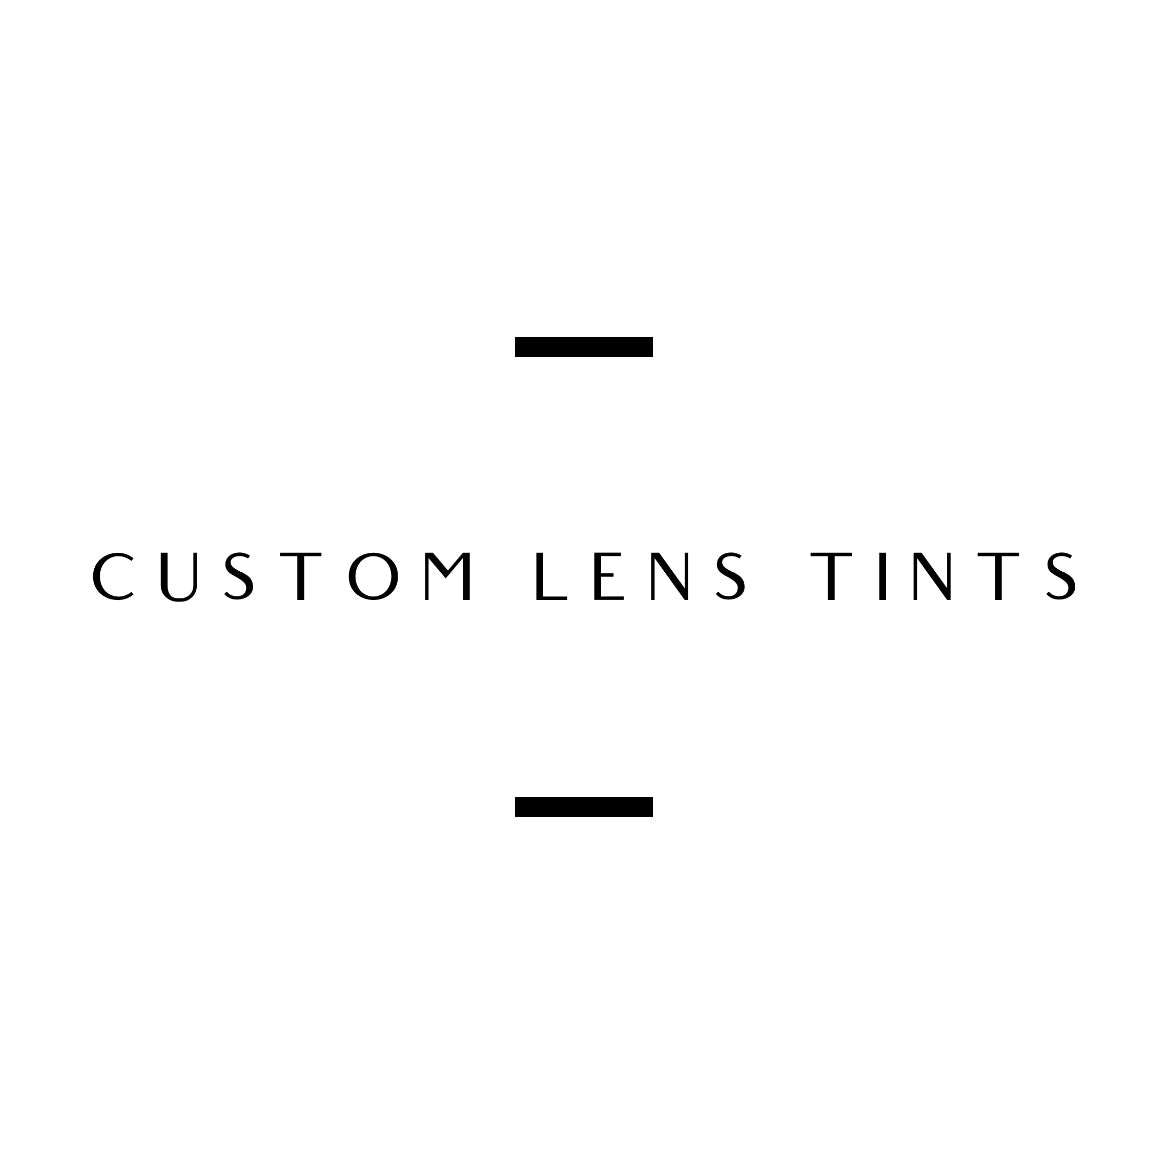 Lens Tinting Services